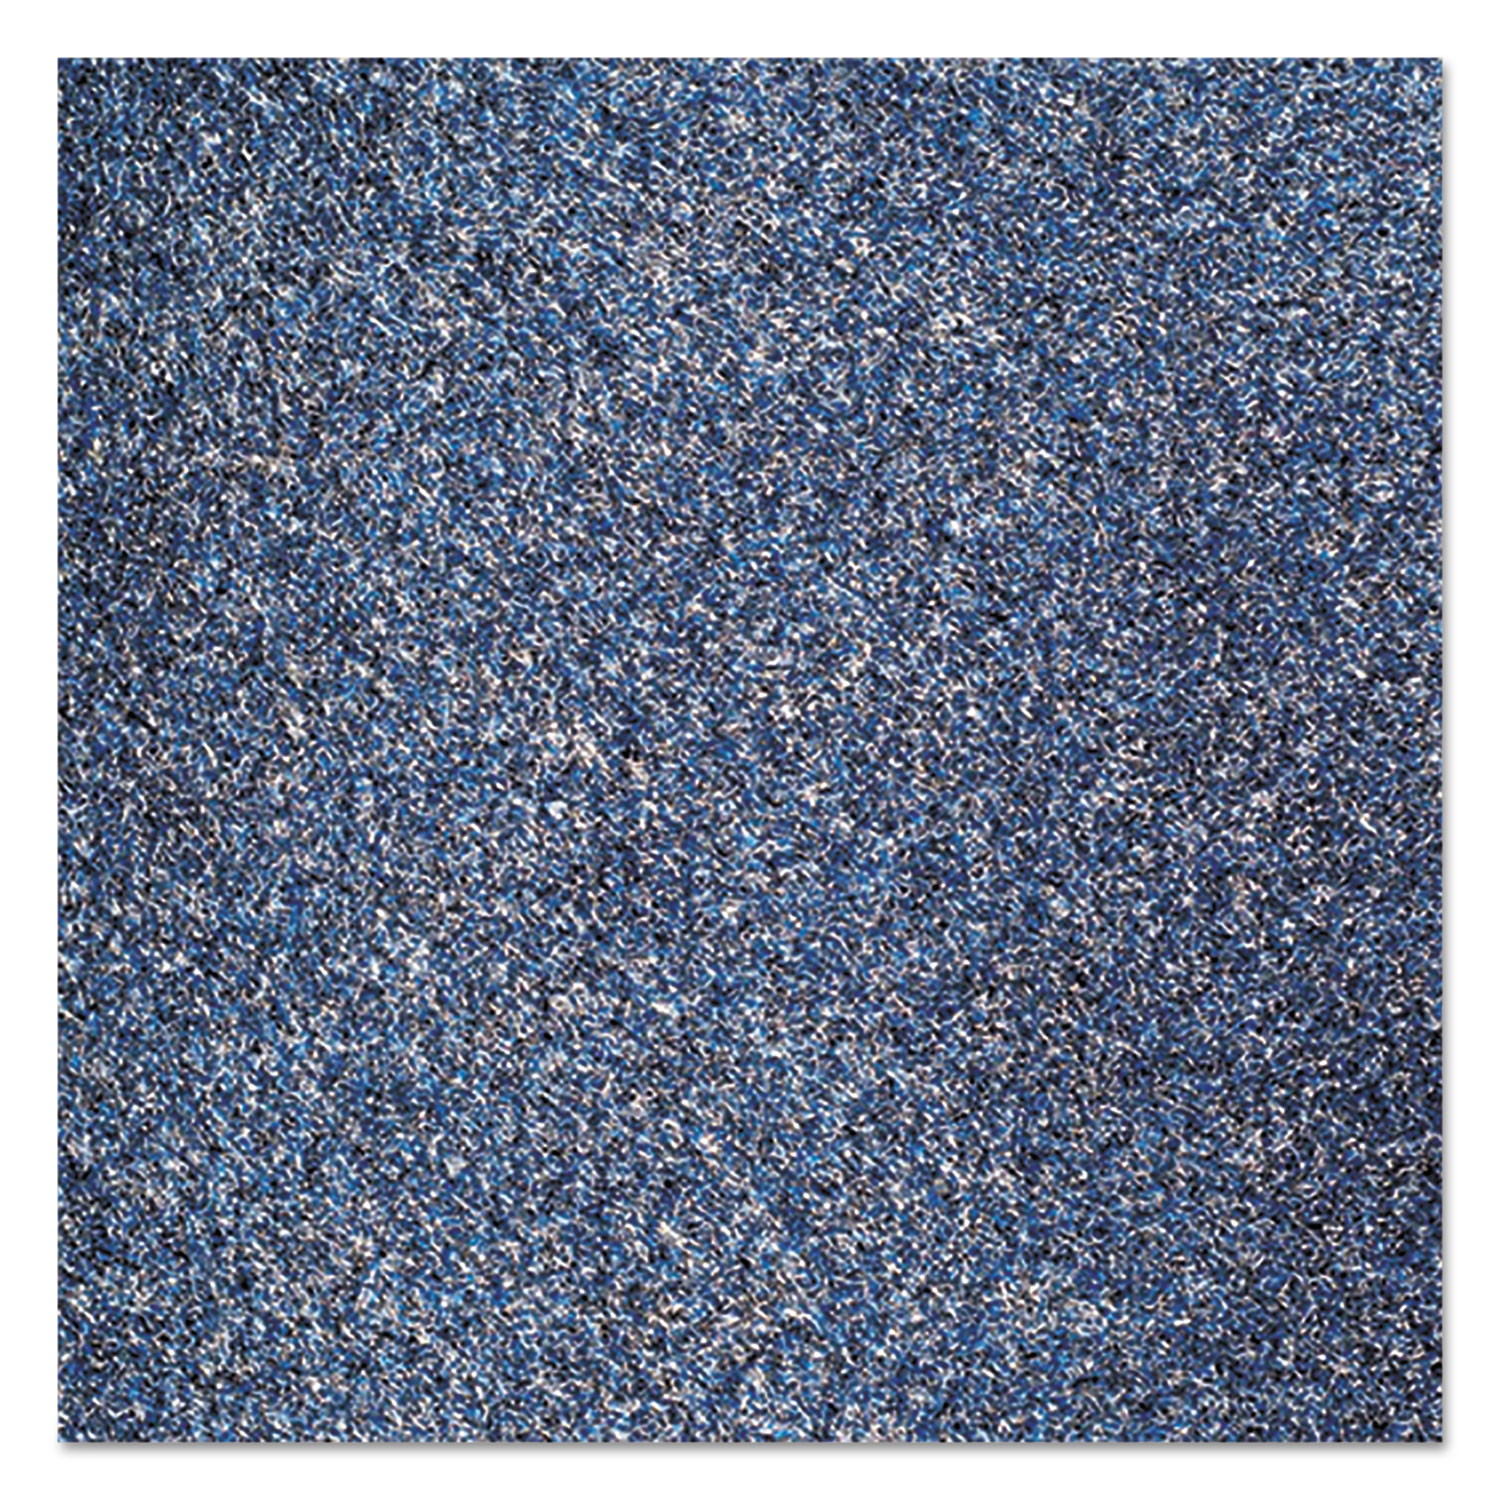  Crown GS 0310MB Rely-On Olefin Indoor Wiper Mat, 36 x 120, Marlin Blue (CWNGS0310MB) 